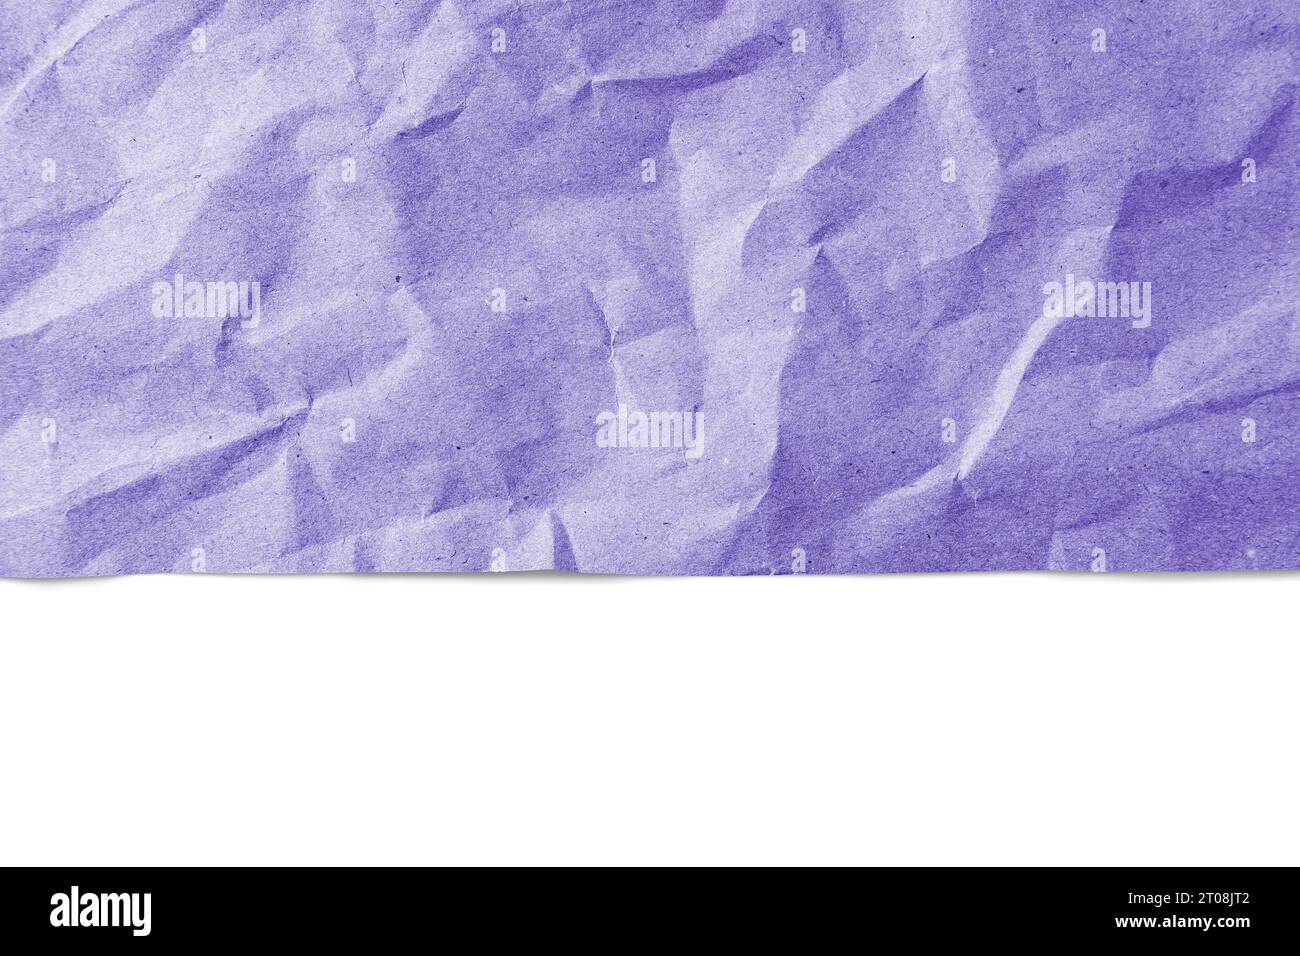 Recycled Crumpled Purple Paper Texture With A Torn Edge Isolated On White  Background Stock Photo by Kateryna_Maksymenko